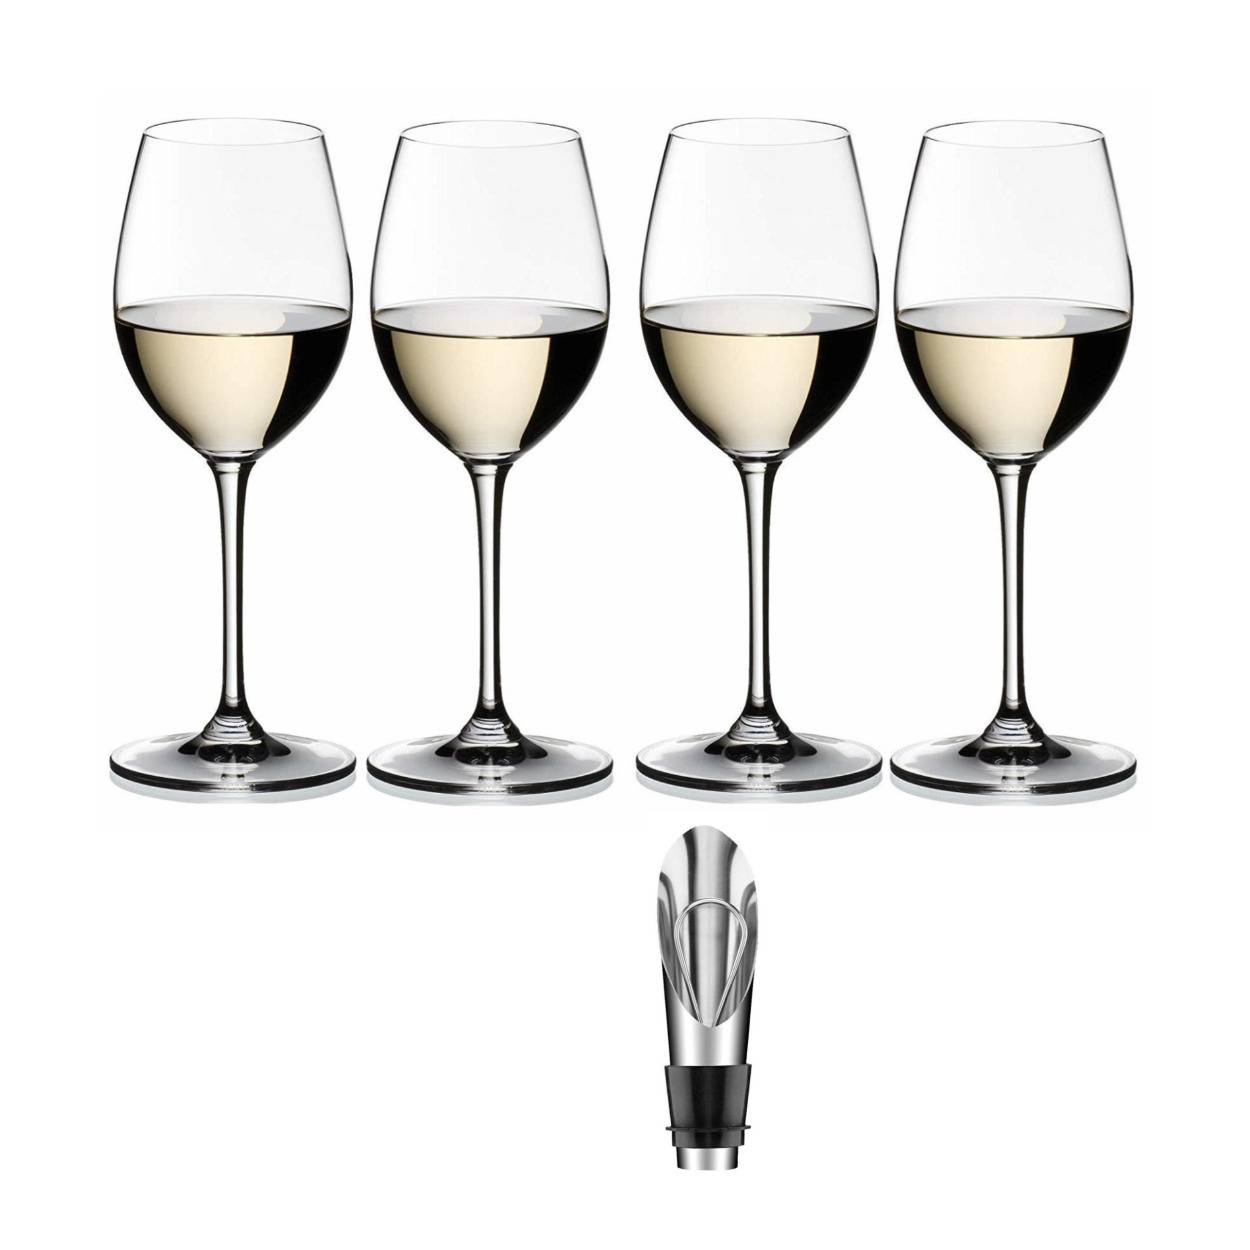 Riedel Vinum Sauvignon Blanc/Dessertwine Glasses 4 Pack with Cuisinart Wine Pourer with Stopper